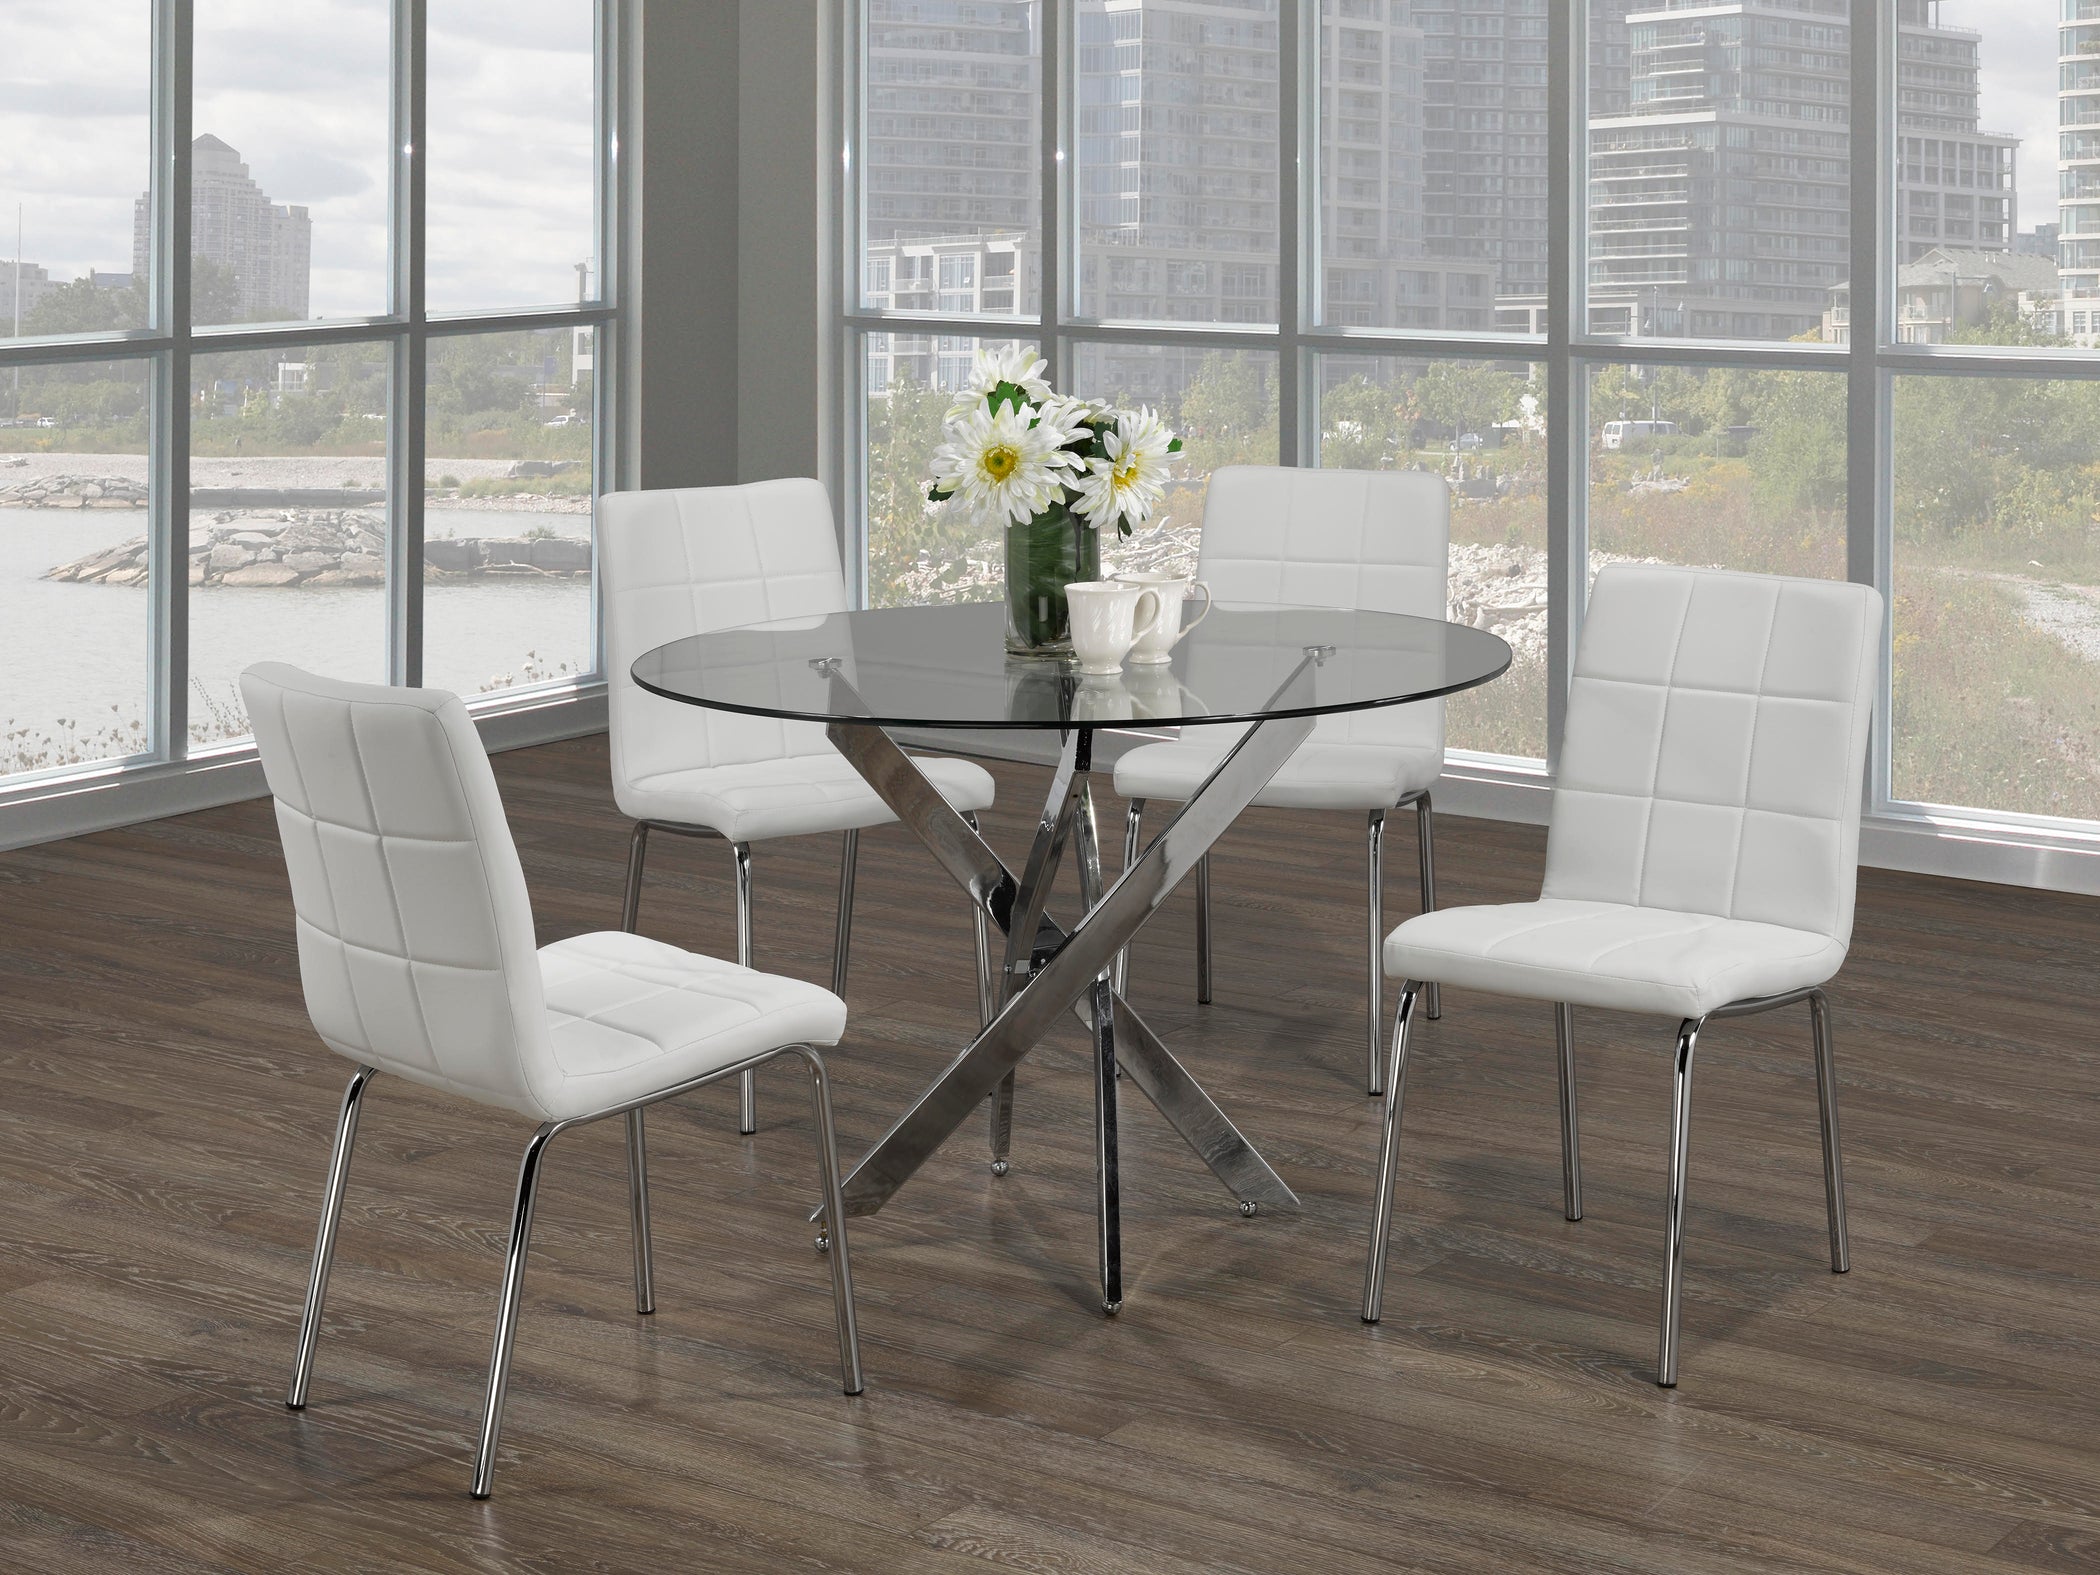 round glass kitchen table for 6